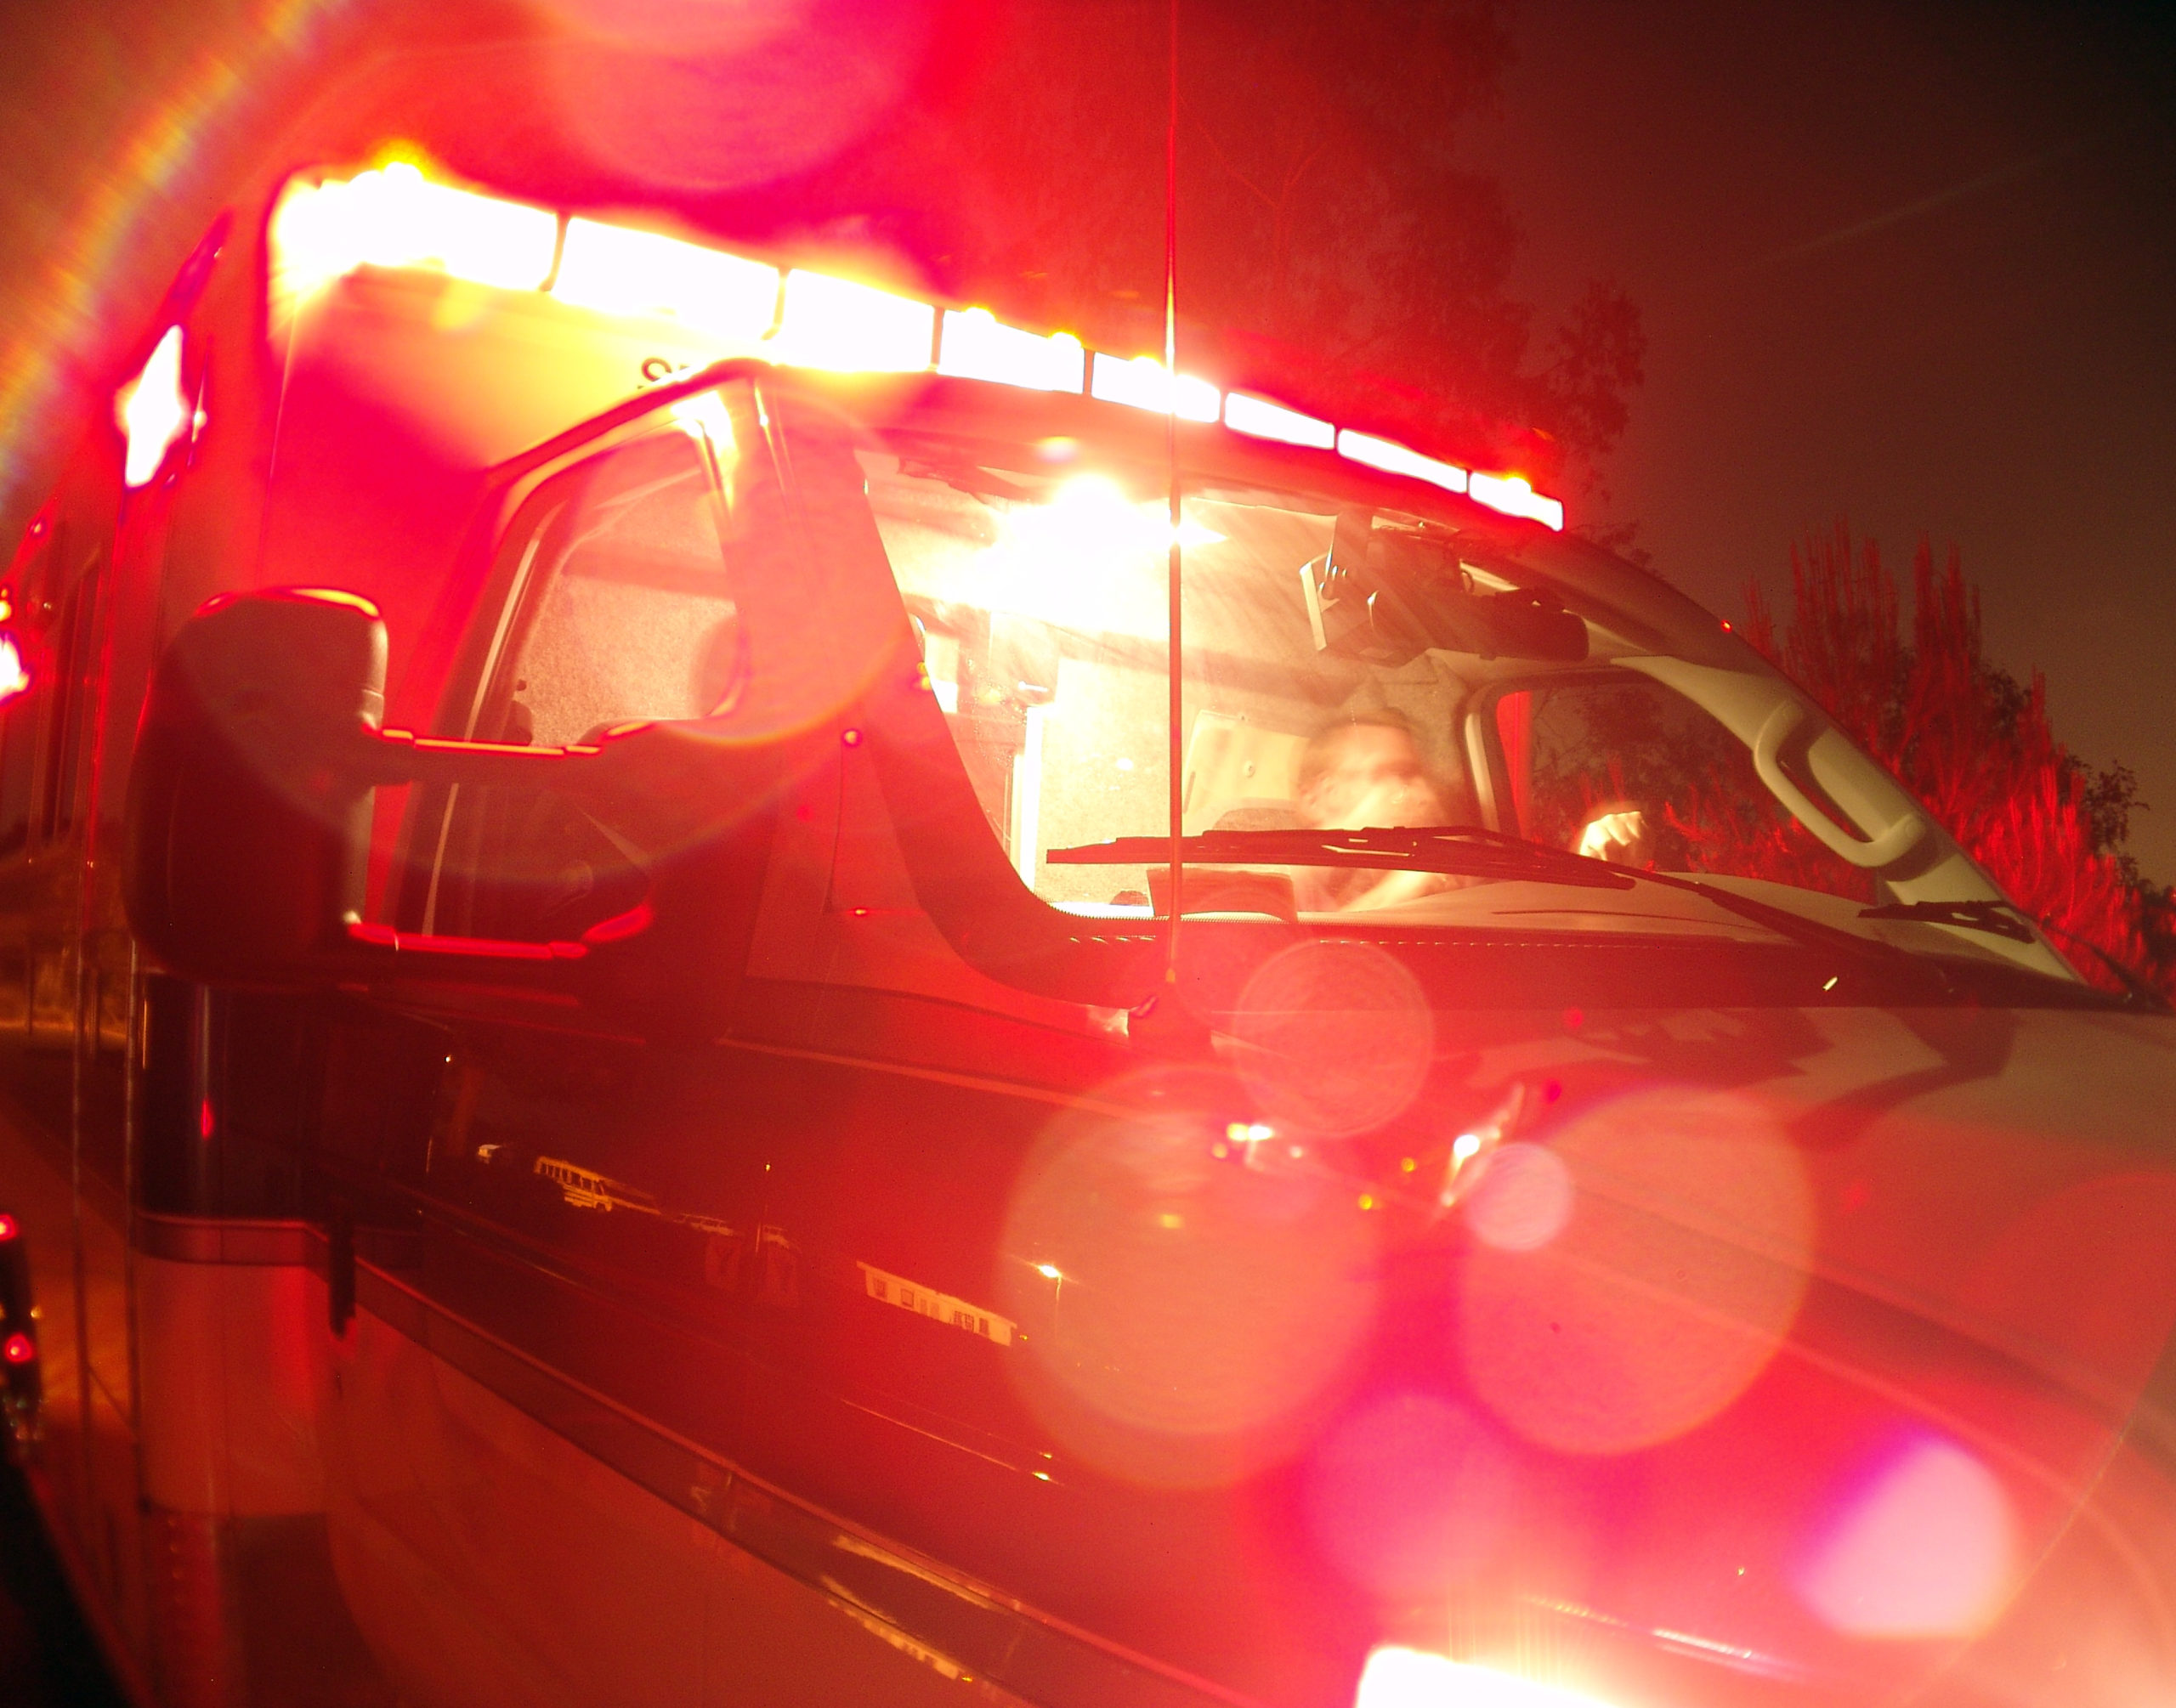 Ambulance with lights on [Shutterstock]